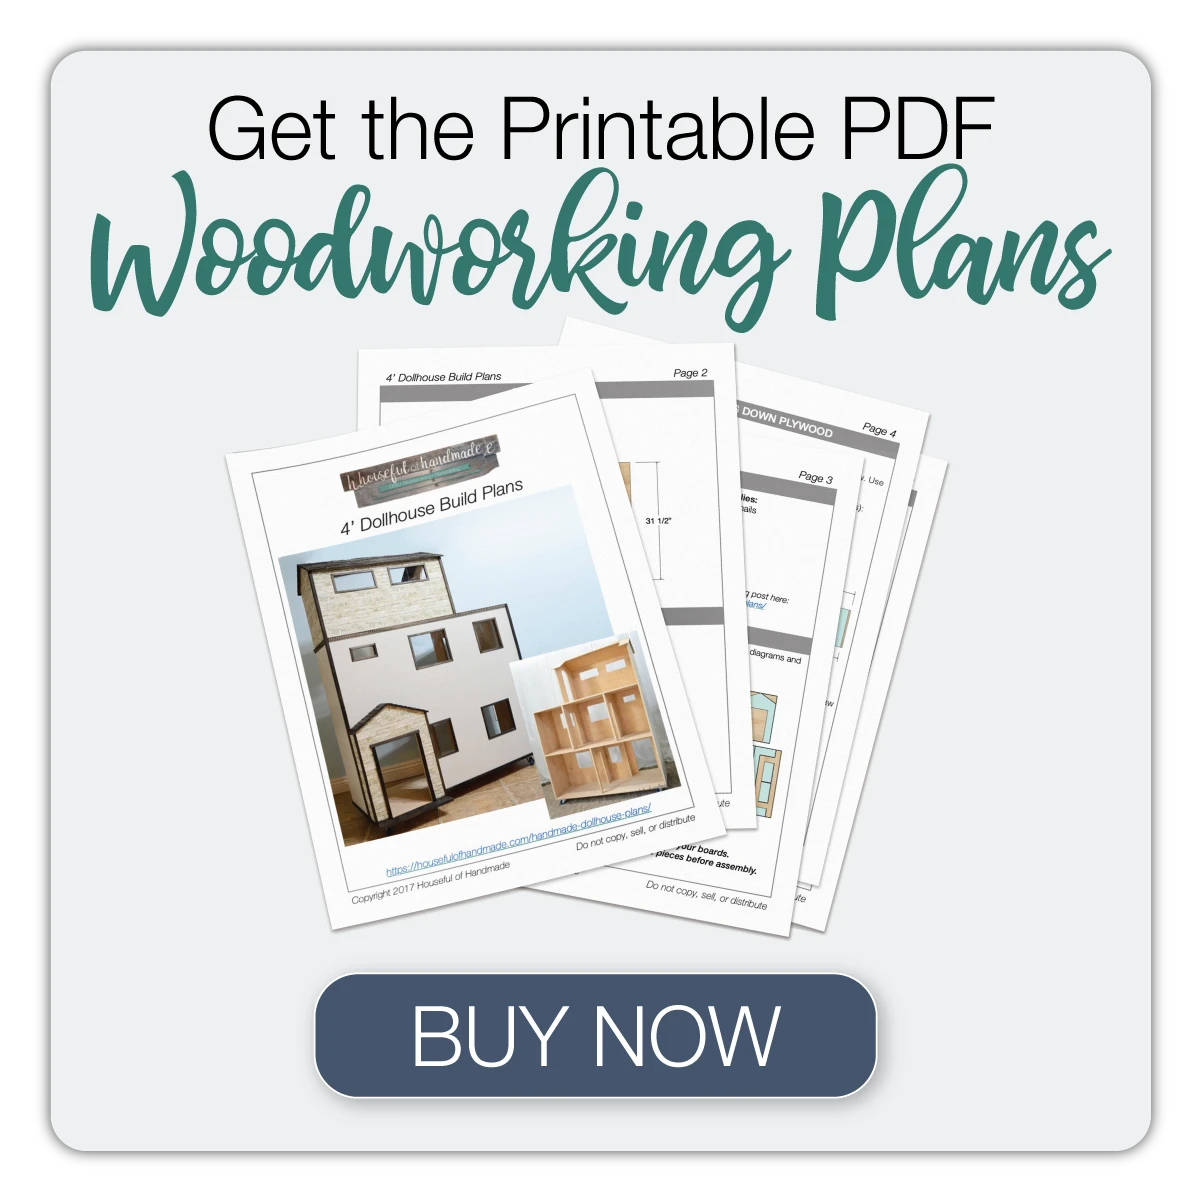 Picture of the printable PDF woodworking plans for a dollhouse and a button to purchase them.